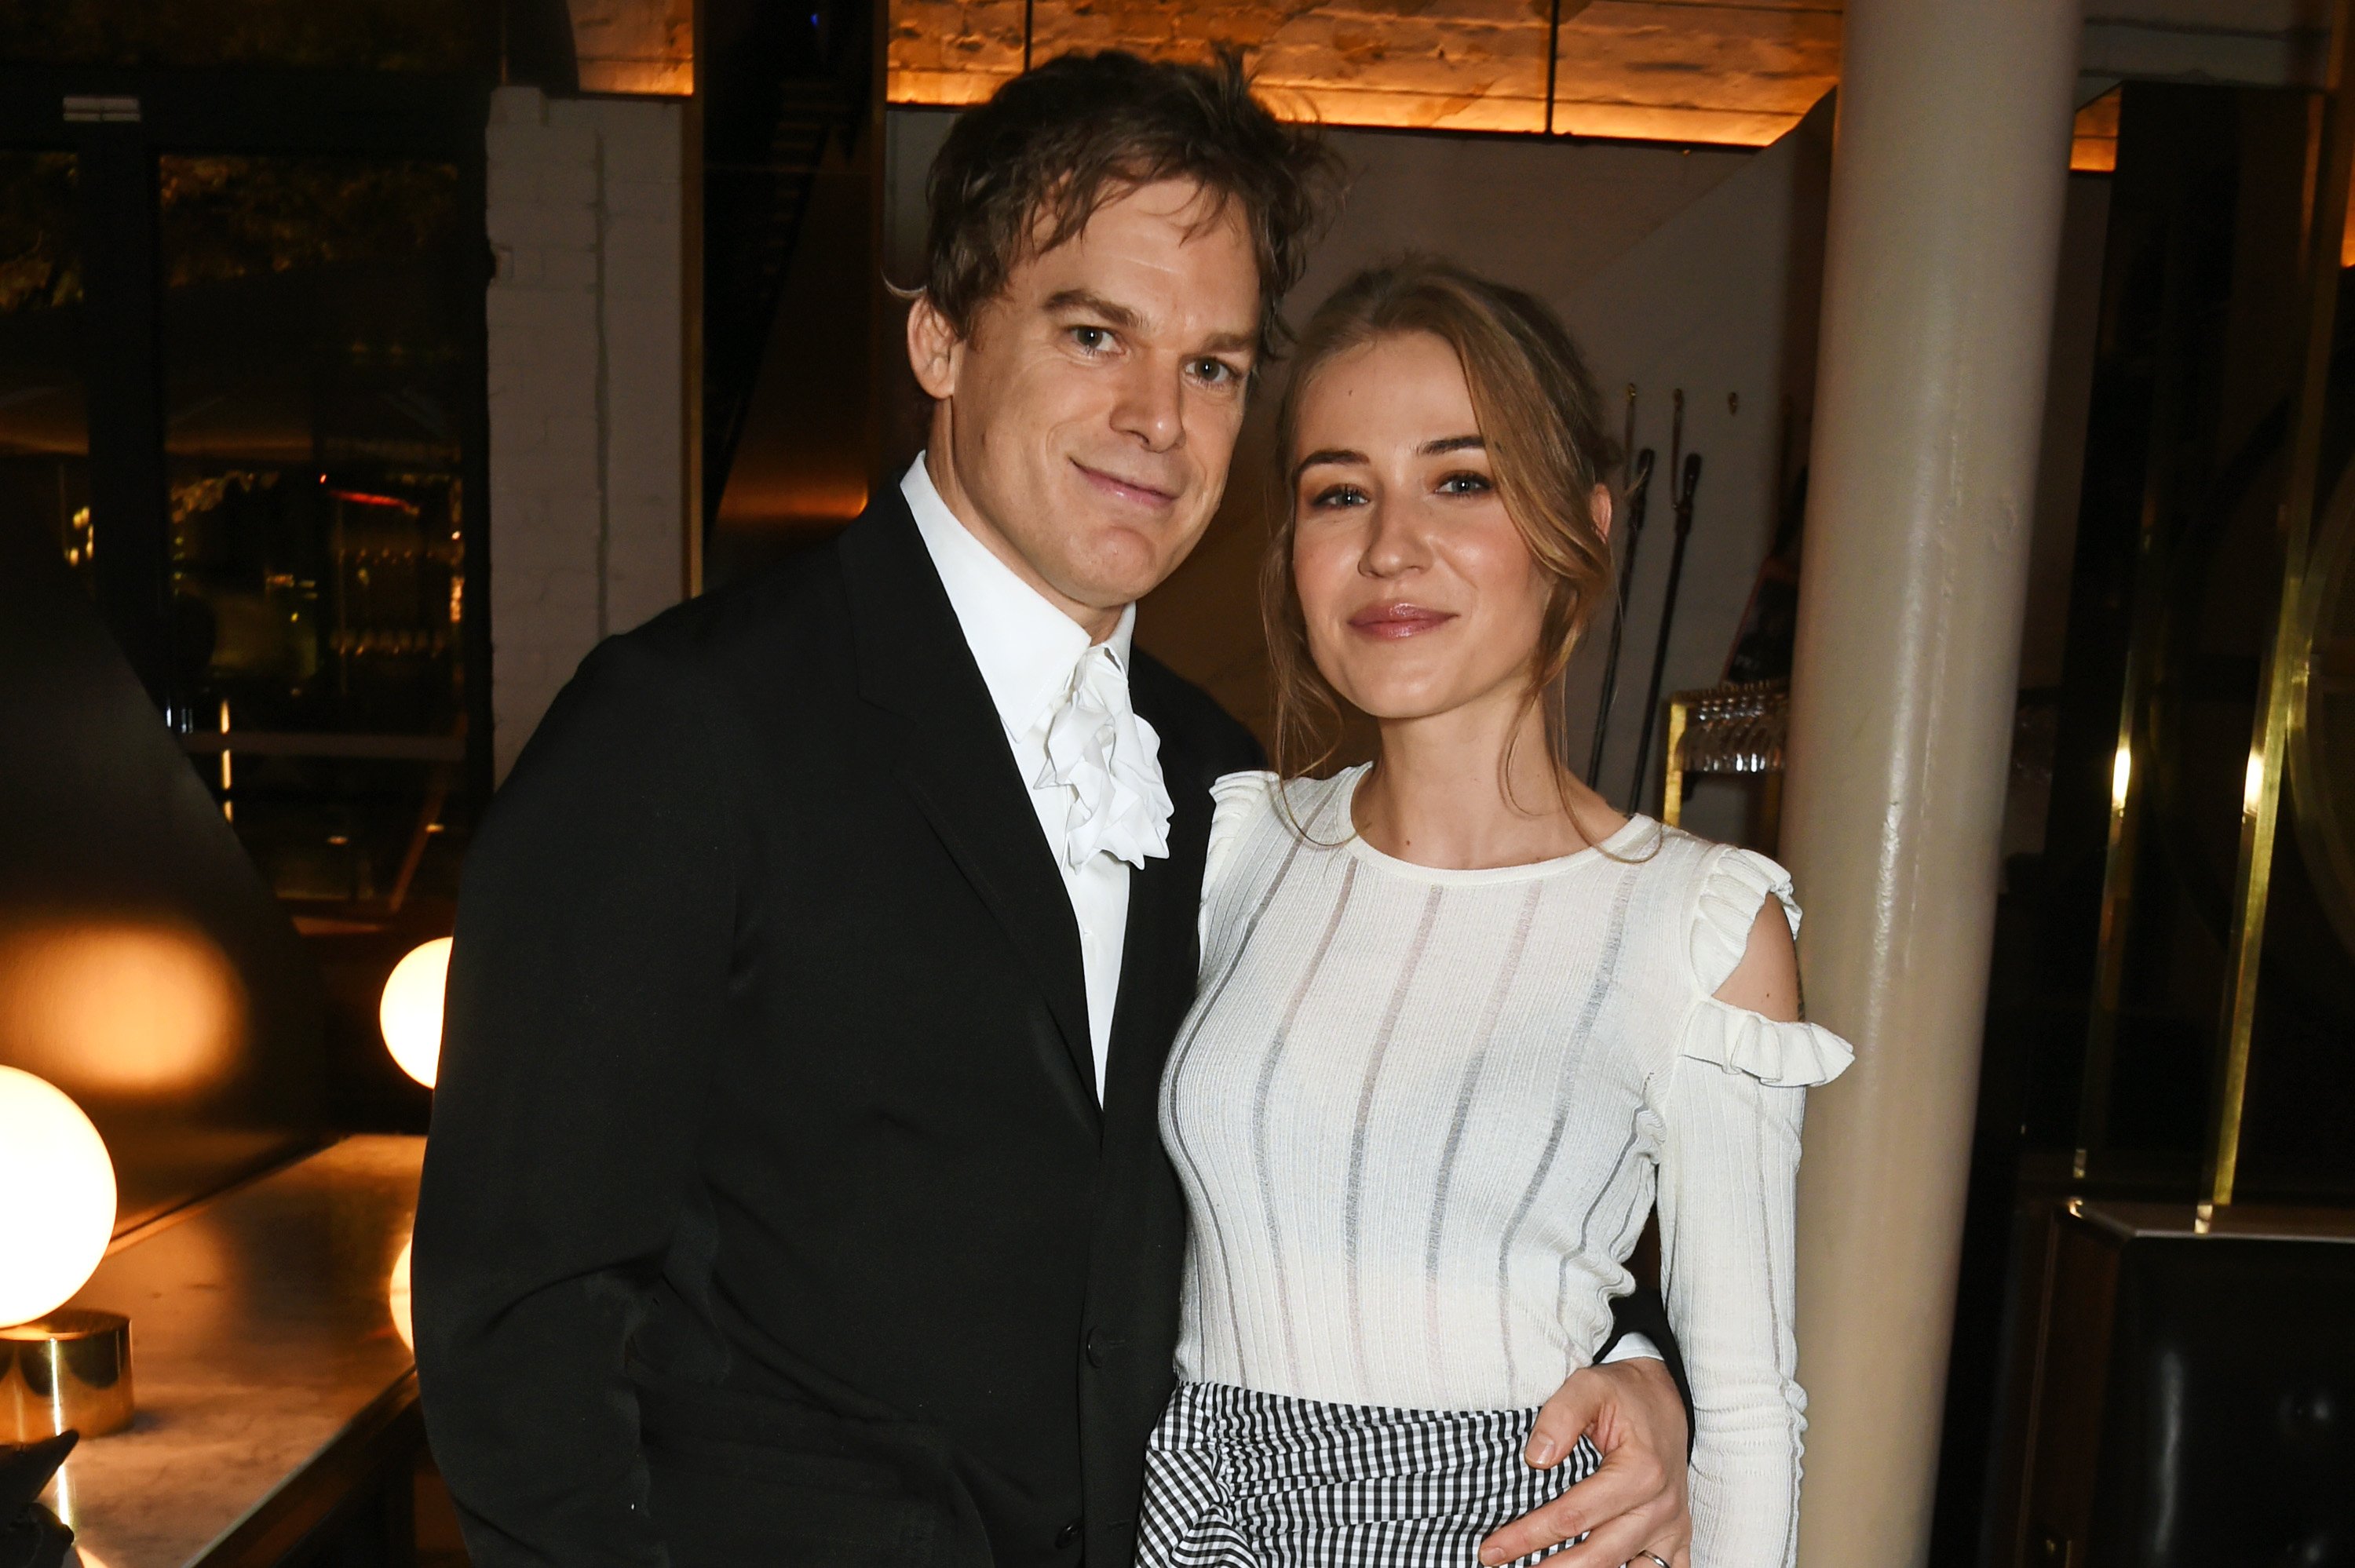 Michael C. Hall (L) and wife Morgan Macgregor attend the press night after party for "Lazarus" at the King's Cross Theatre on November 8, 2016, in London, England. | Source: Getty Images.